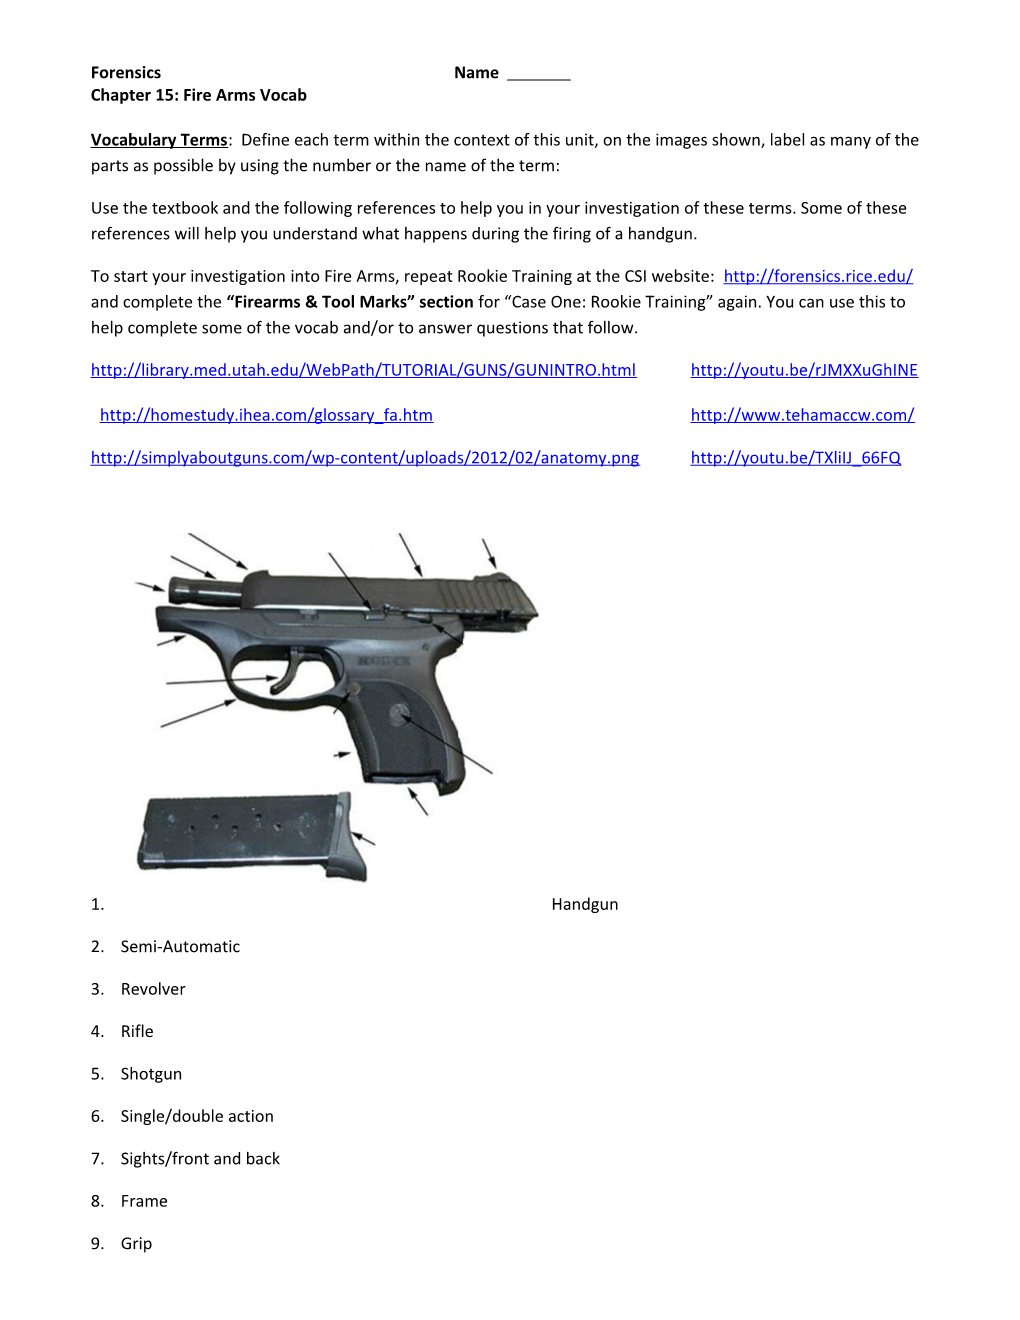 Forensics Chapter 15: Fire Arms Vocab